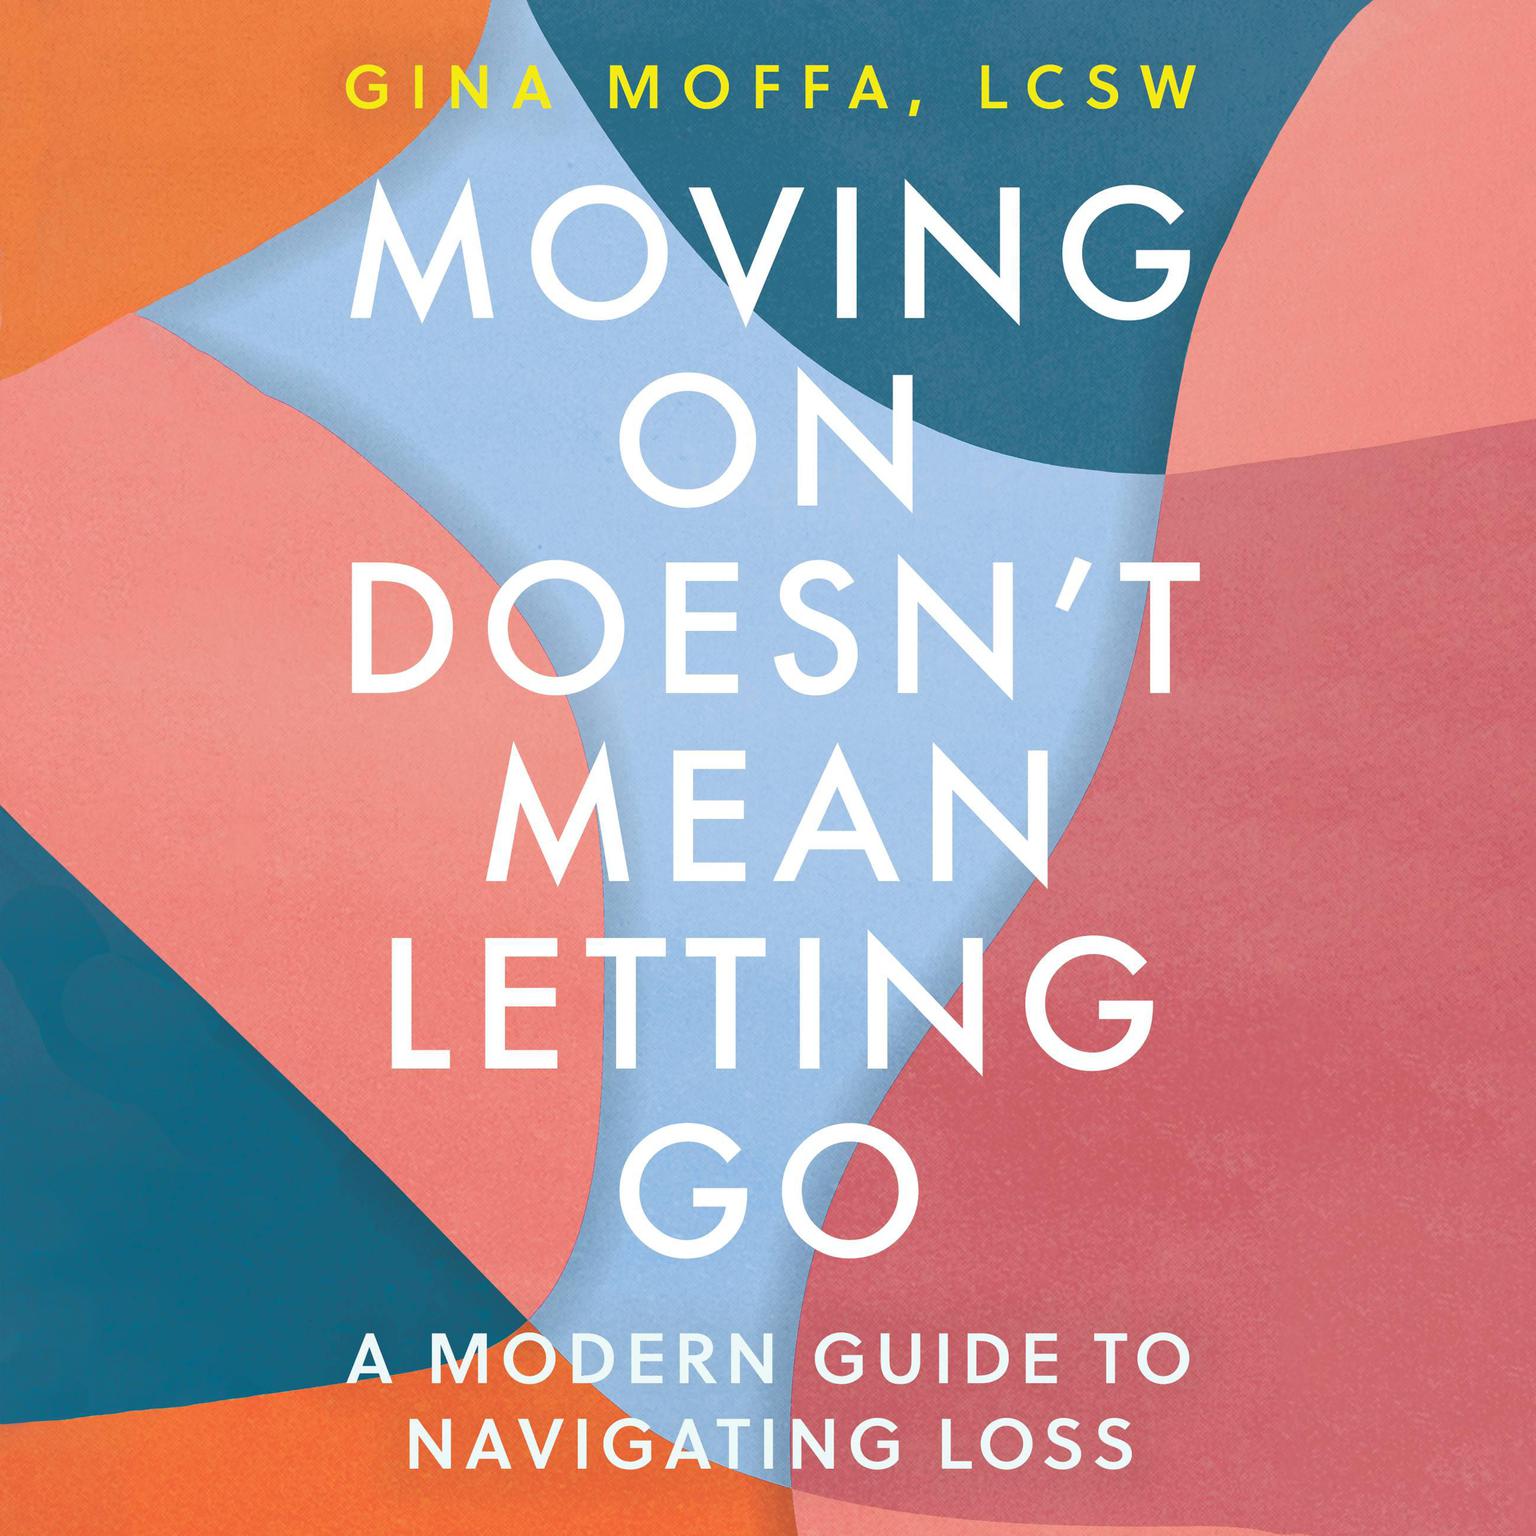 Moving On Doesnt Mean Letting Go: A Modern Guide to Navigating Loss Audiobook, by Gina Moffa